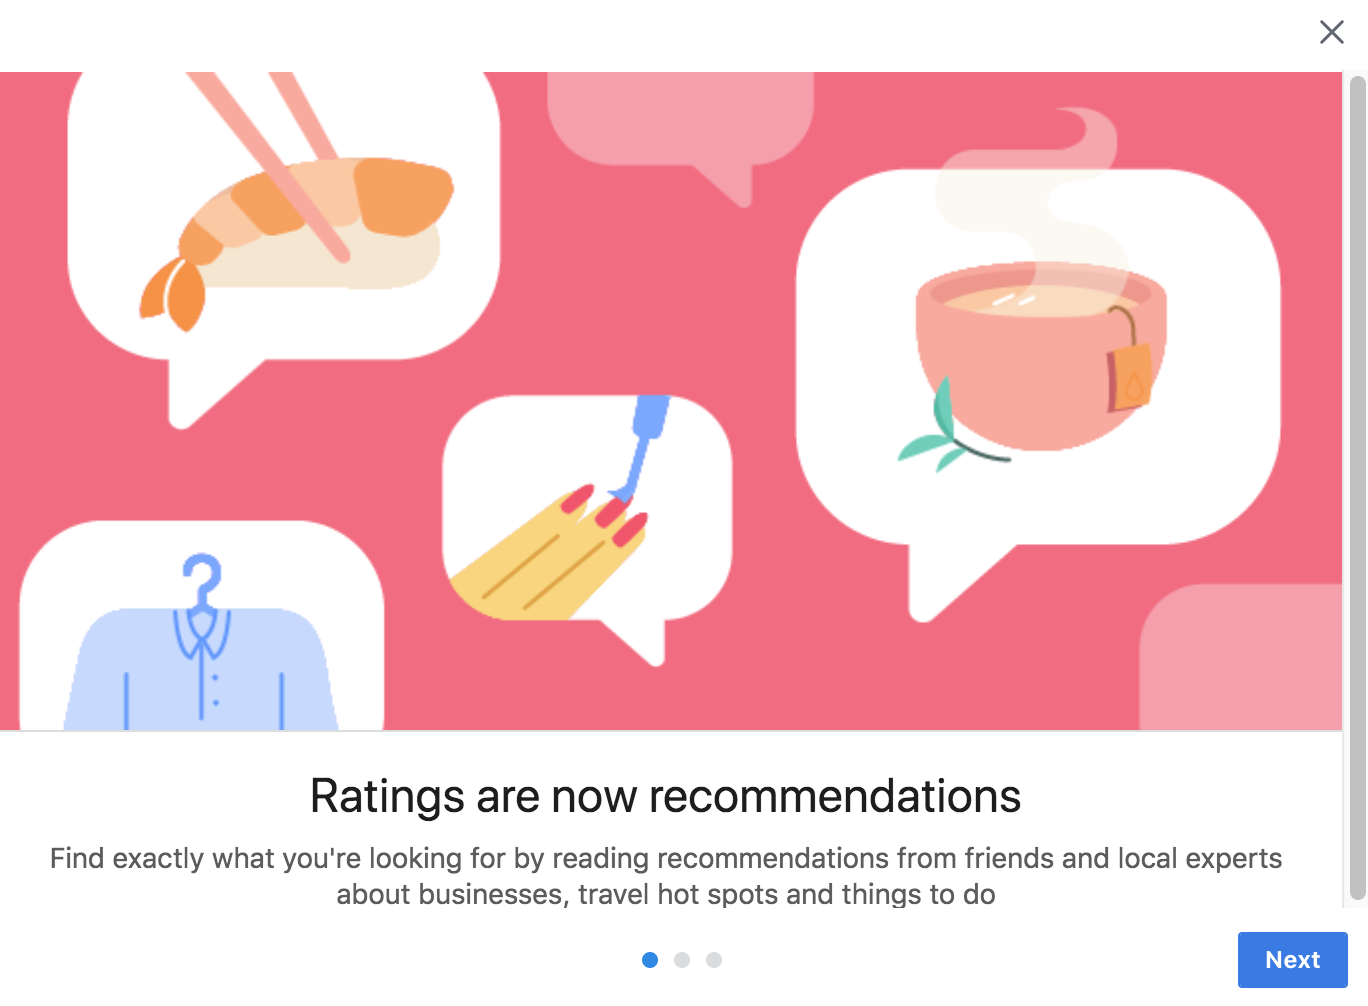 Ratings are recommendations